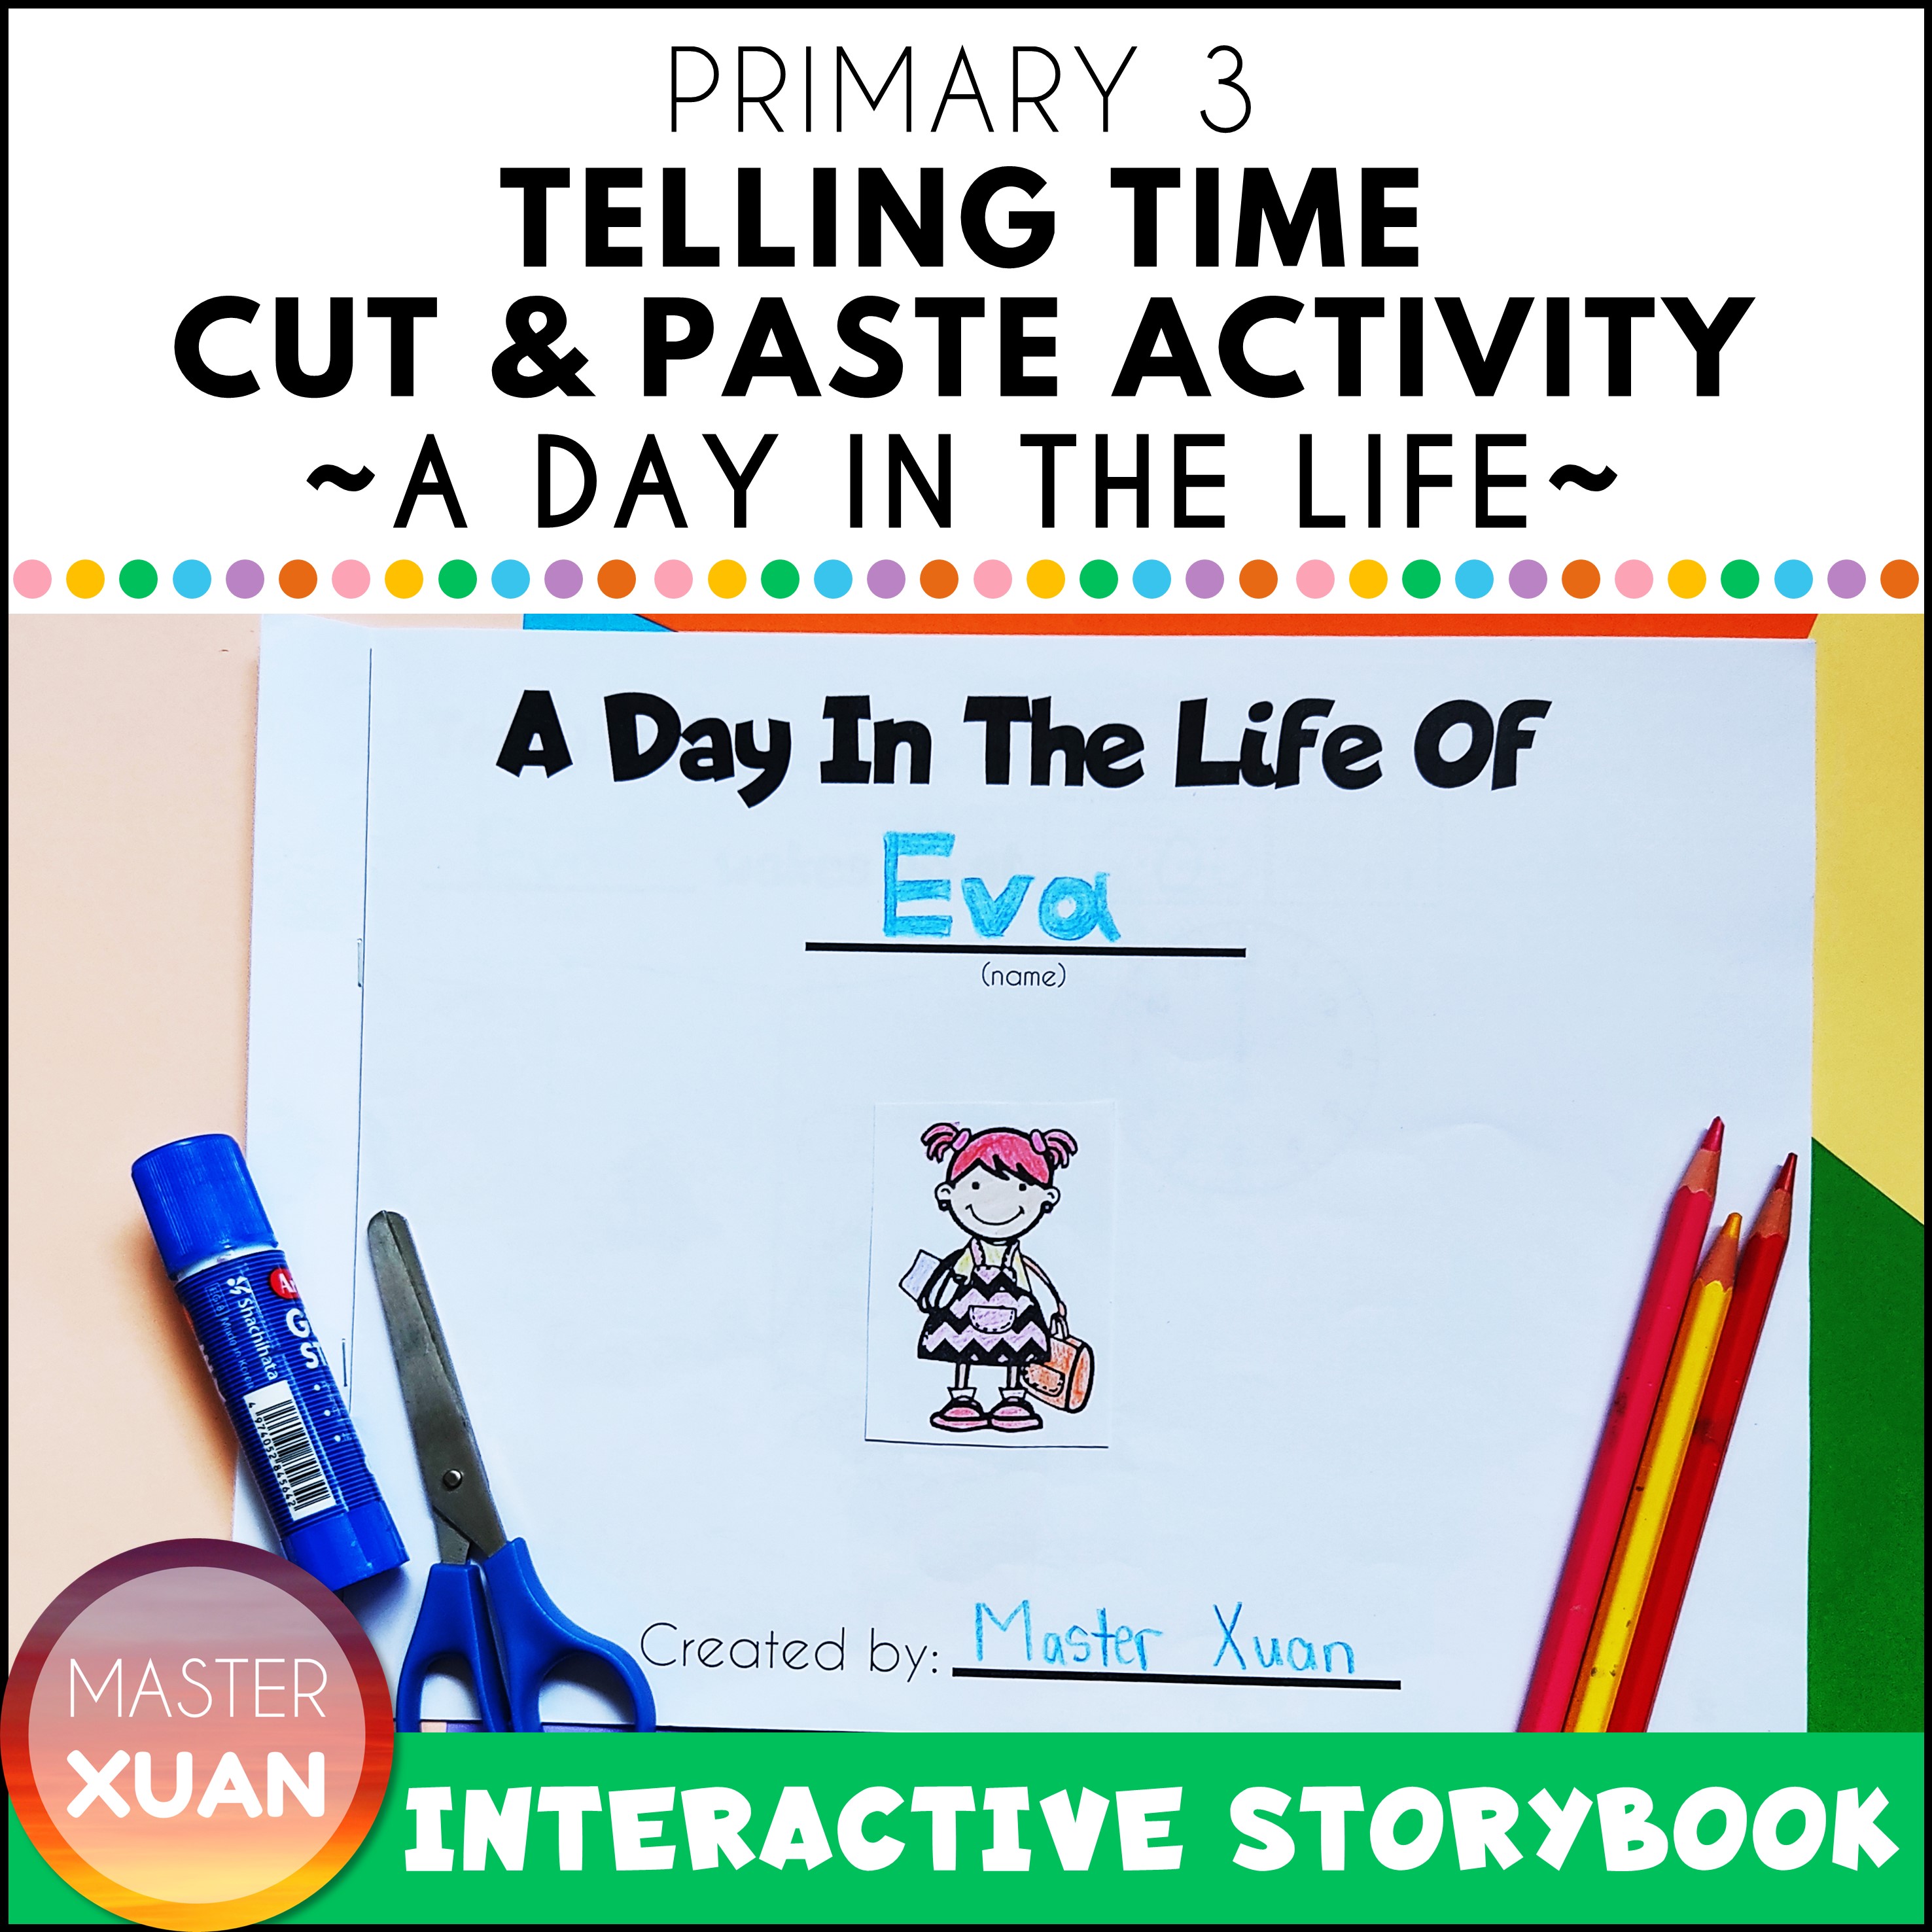 Review tell time to the nearest minute using interactive storybook.